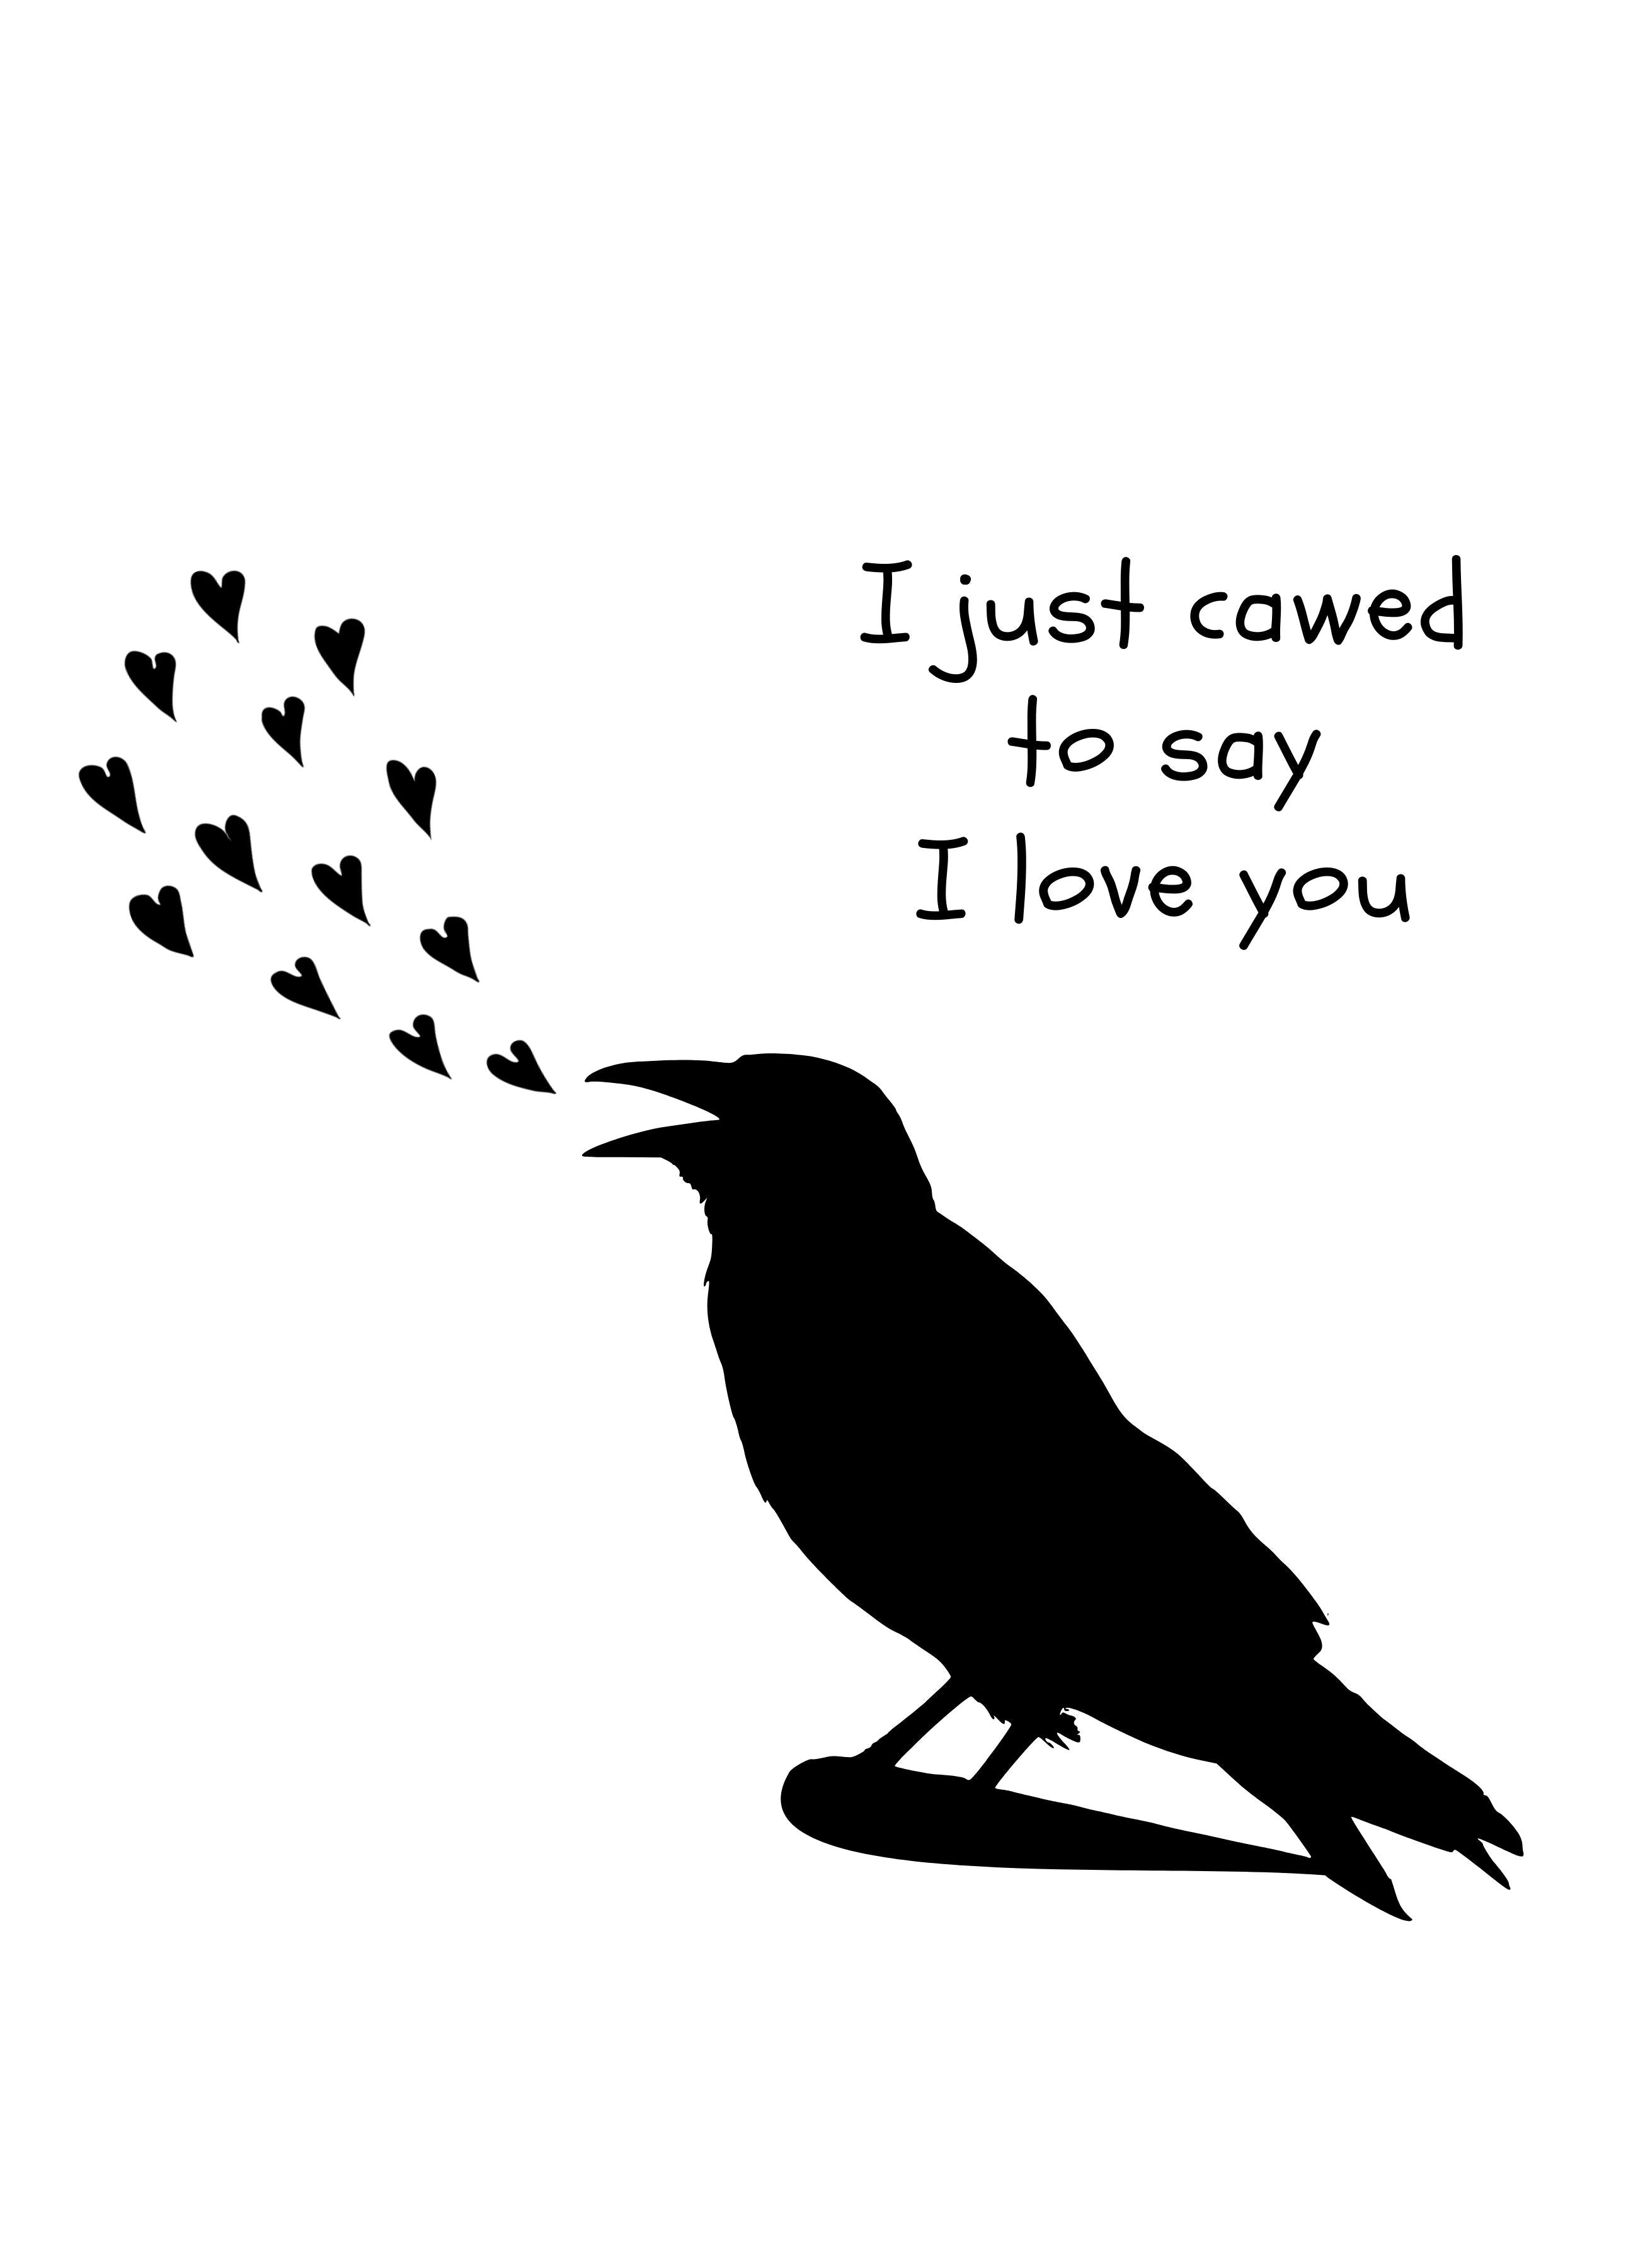 Body raven "I just cawed to say I love you" - Fairy Positron